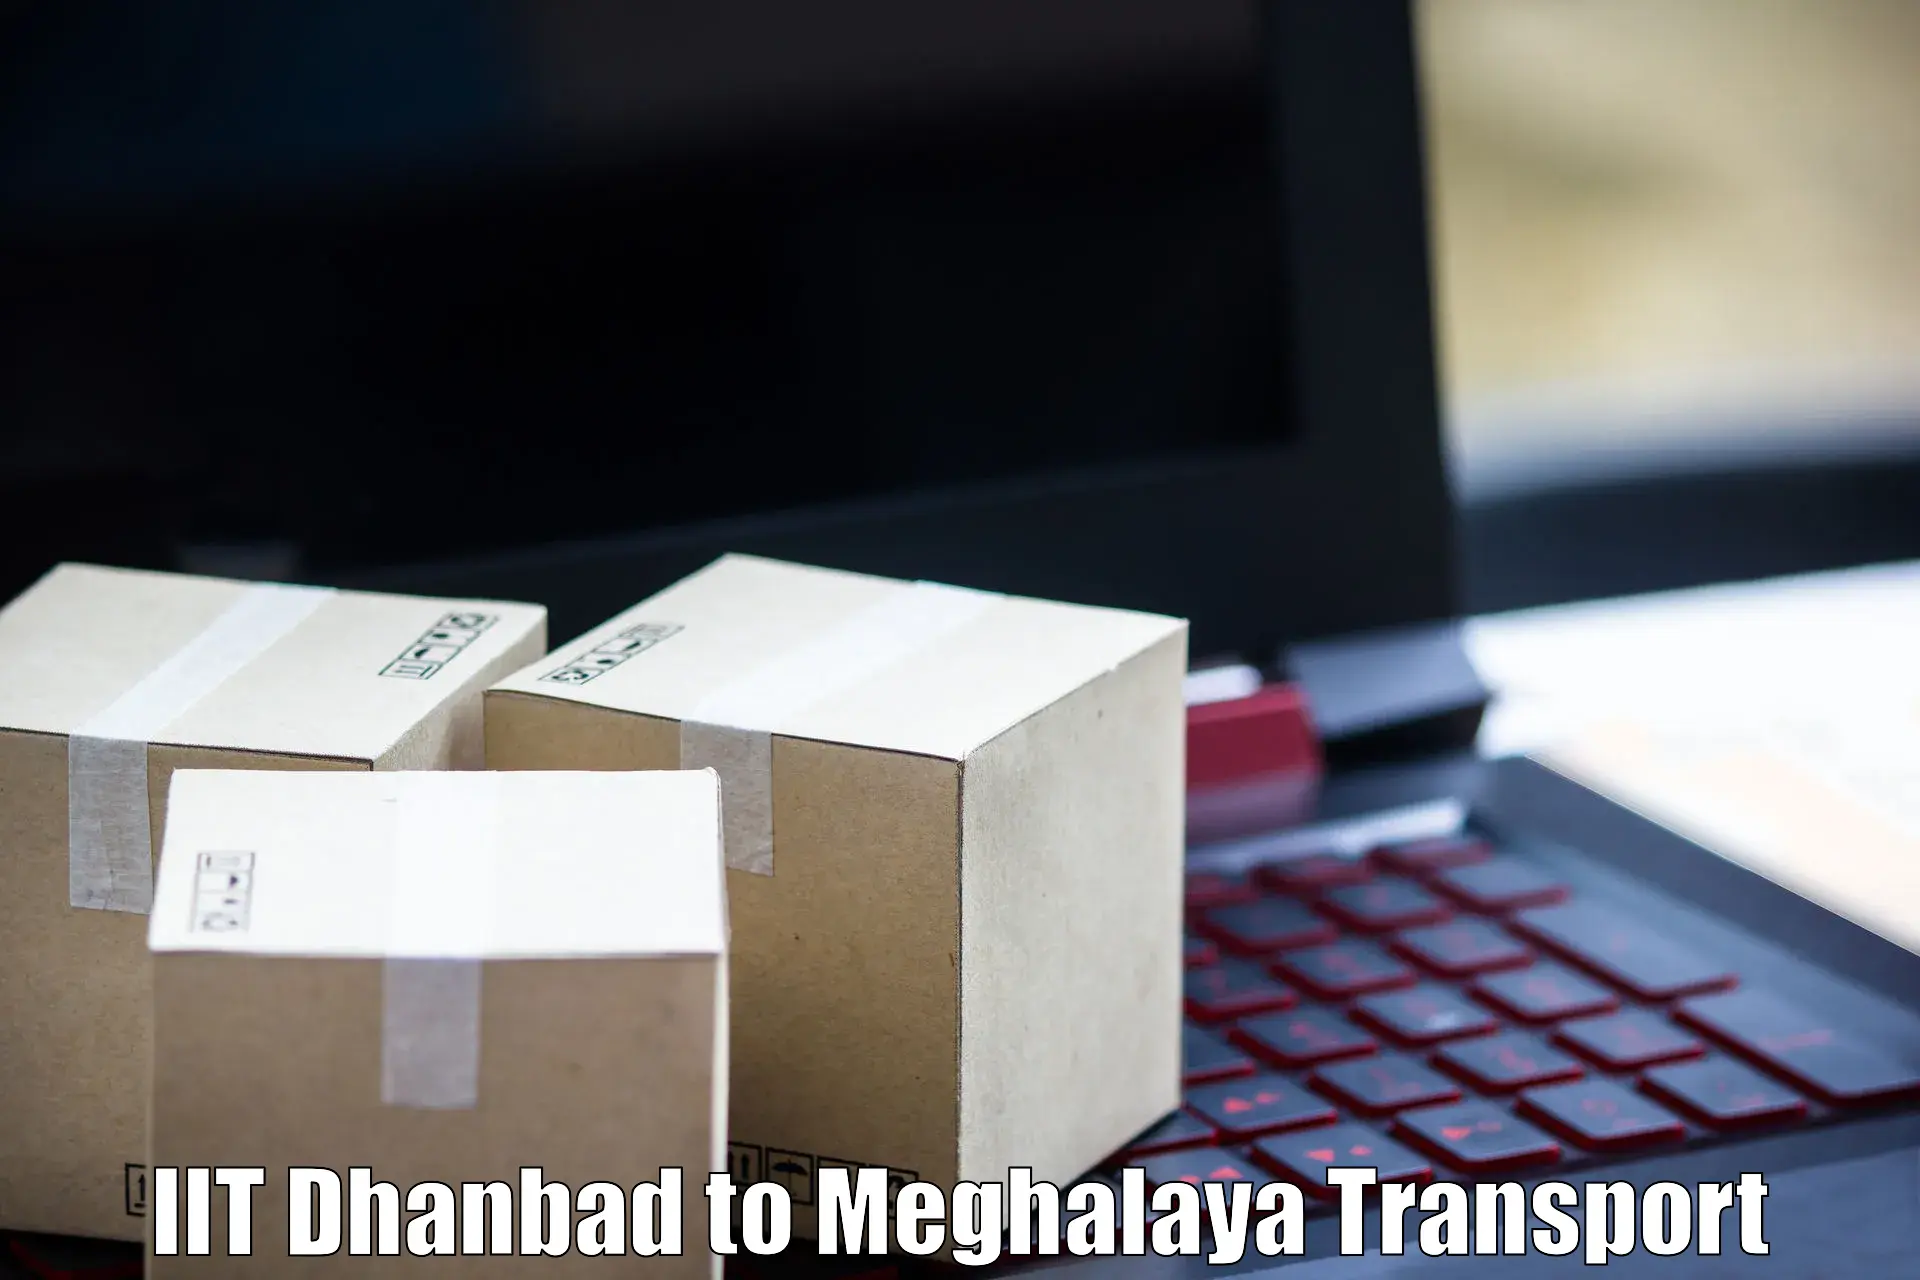 Delivery service IIT Dhanbad to Nongstoin